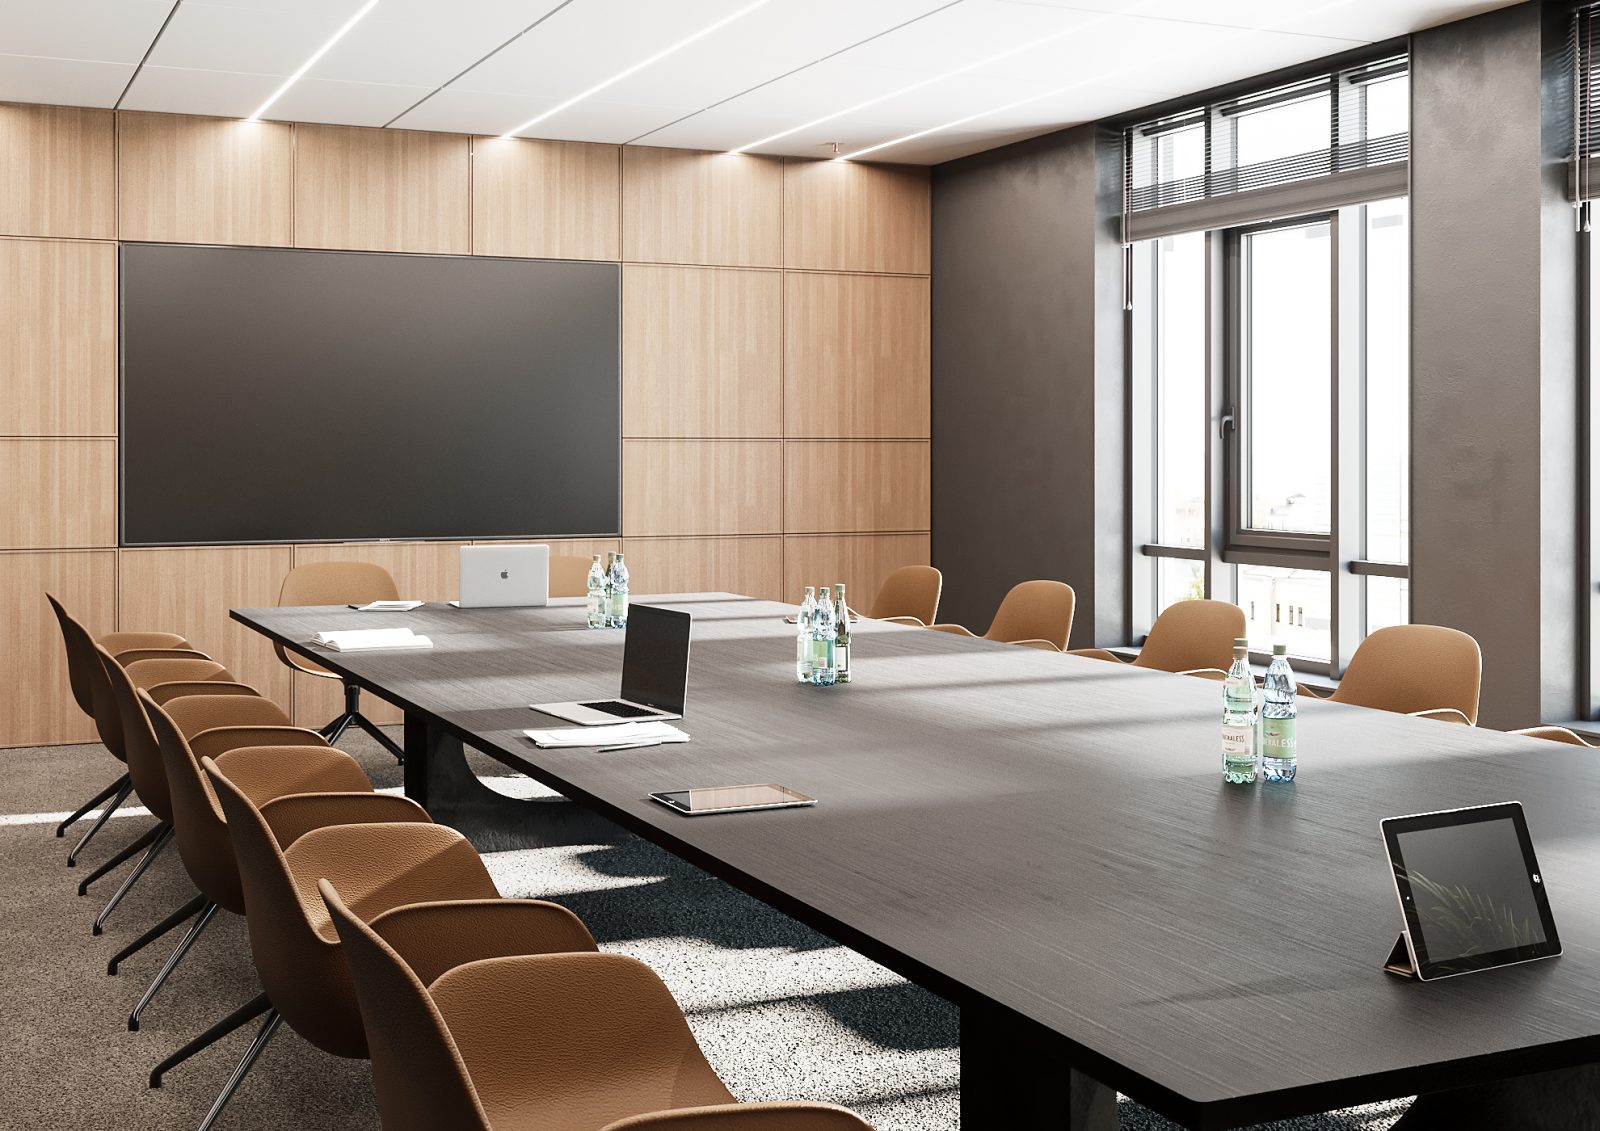 Interior design of conference rooms 9